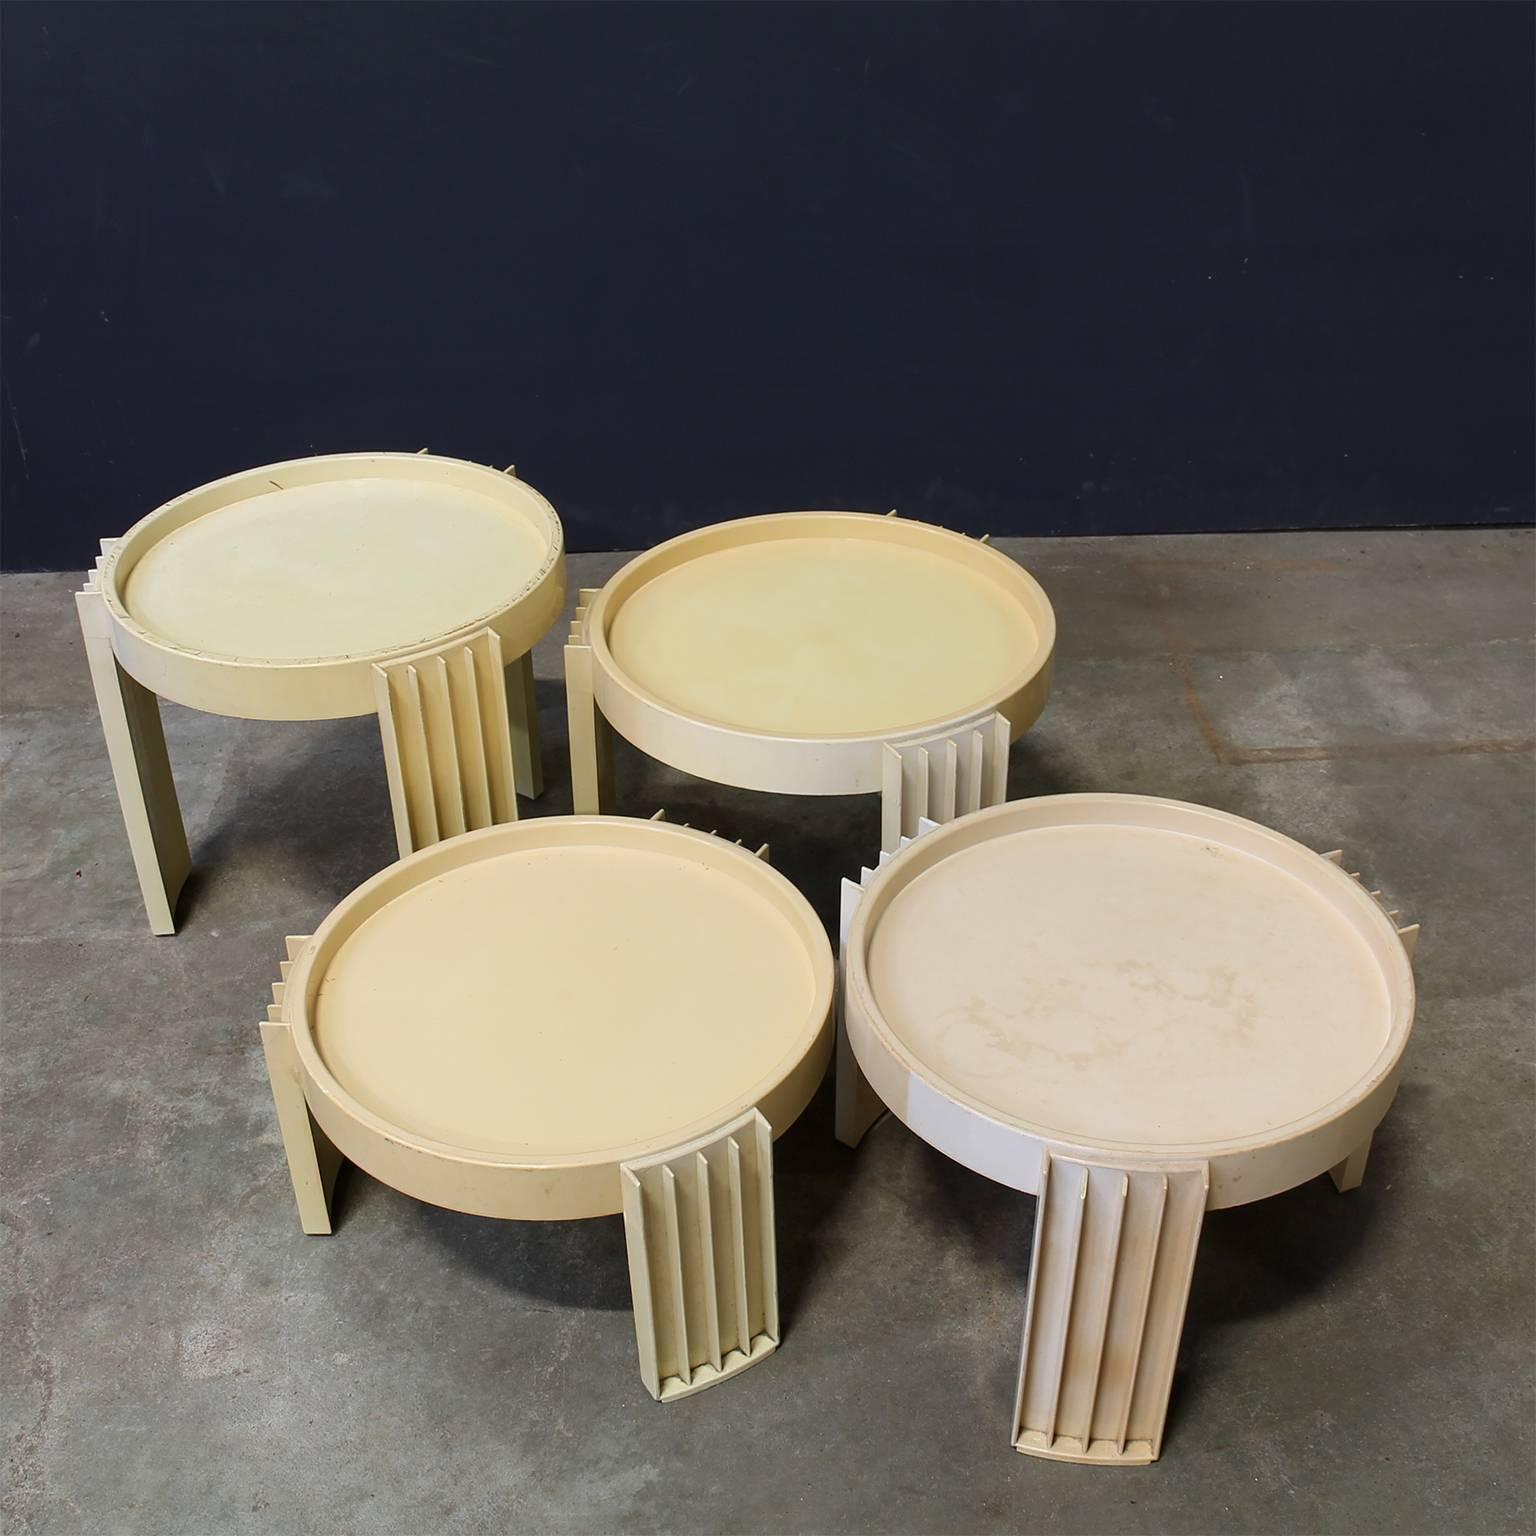 Italian 1967, Gianfranco Frattini for Cassina, 8 Pieces of Marema Stacking Tables For Sale